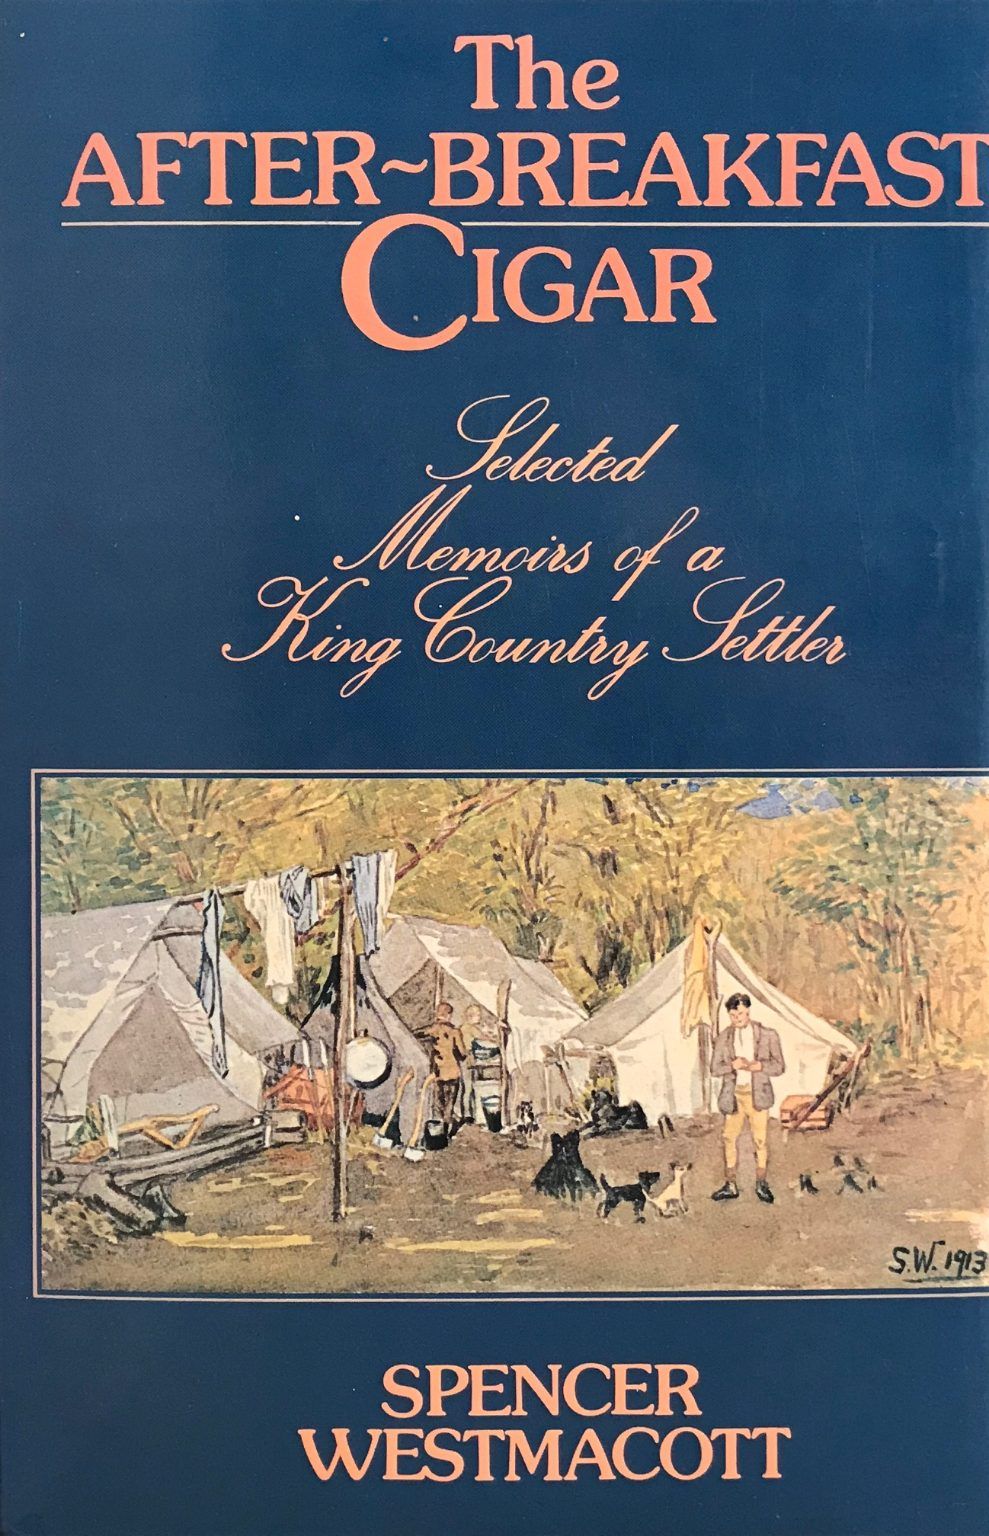 THE AFTER-BREAKFAST CIGAR: Selected Memoirs of a King Country Settler